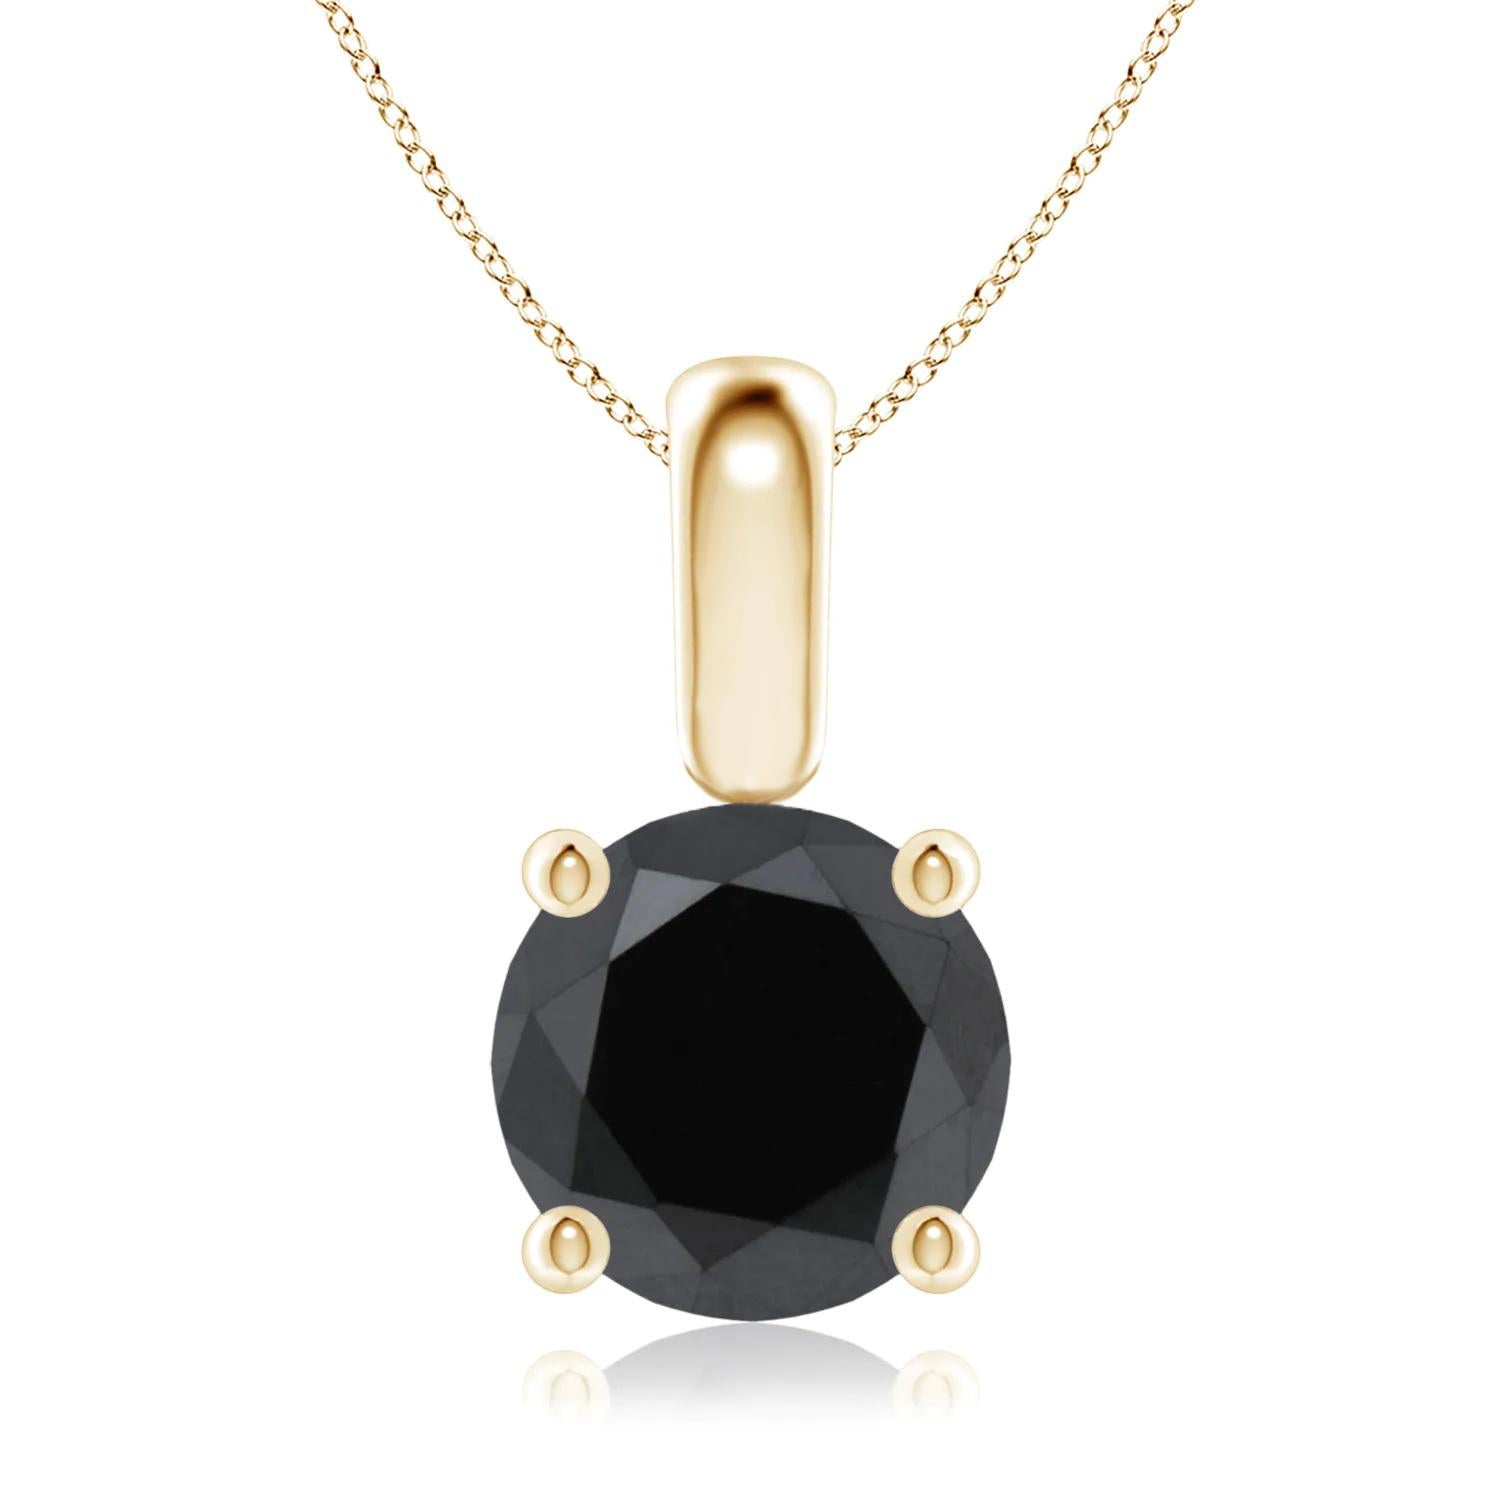 Contemporary 1.35 Carat Round Black Diamond Solitaire Pendant Necklace in 14K Yellow Gold